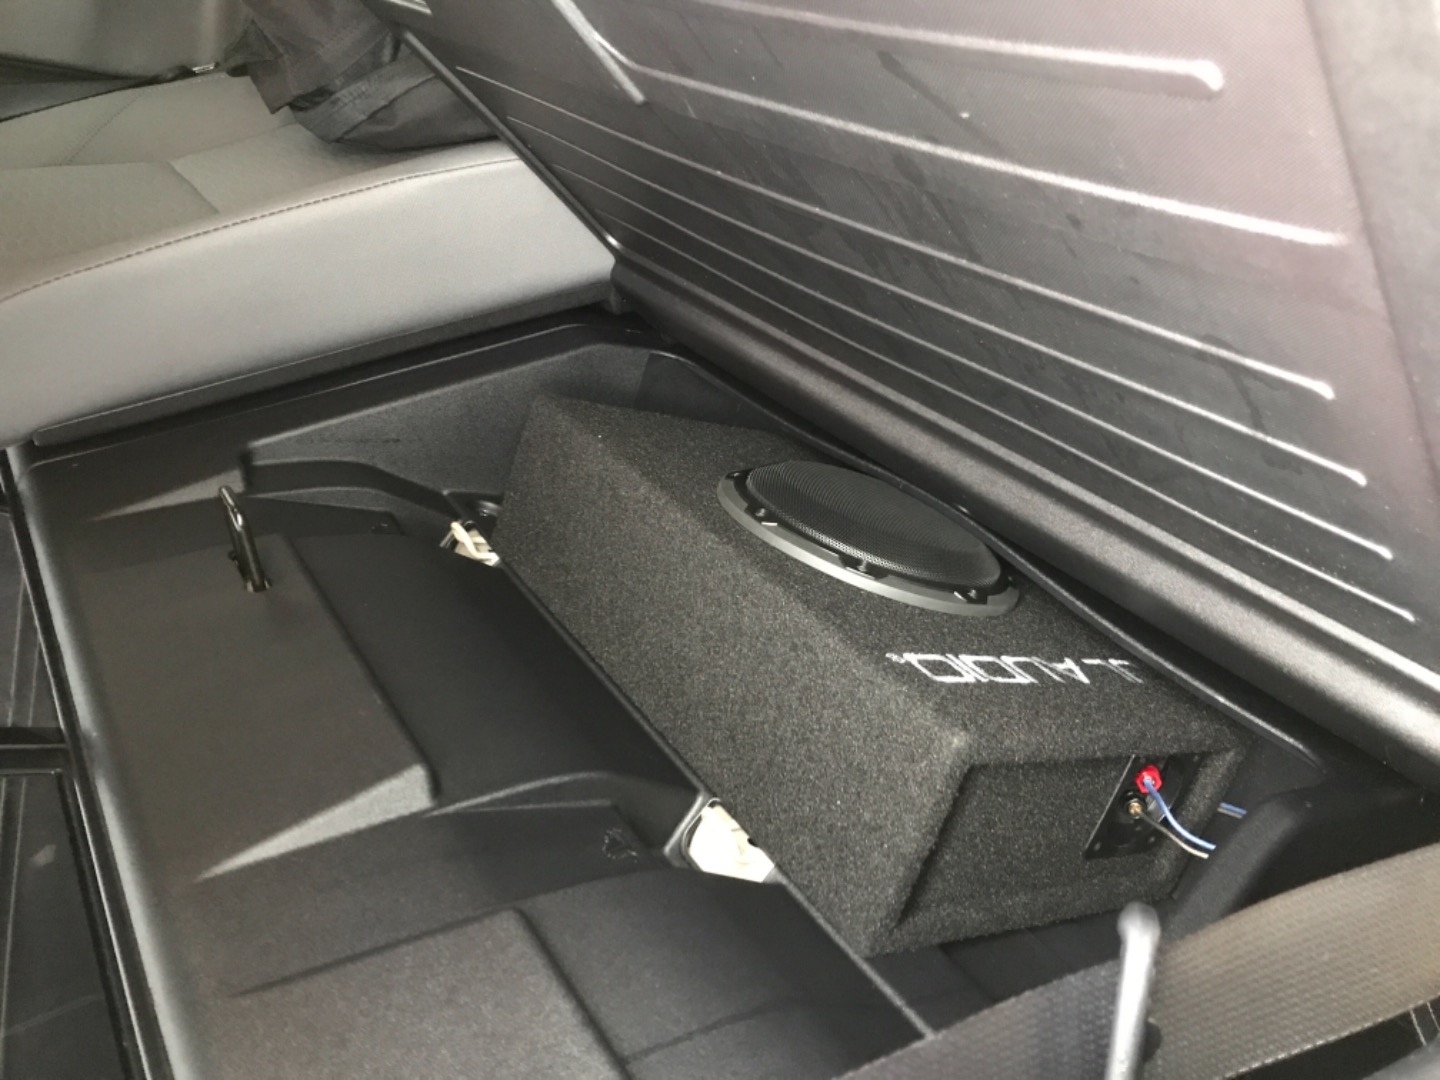 Customer Reviews Jl Audio Cp108lg W3v3 Microsub Slot Ported Enclosure With One 8 W3v3 Subwoofer At Crutchfield